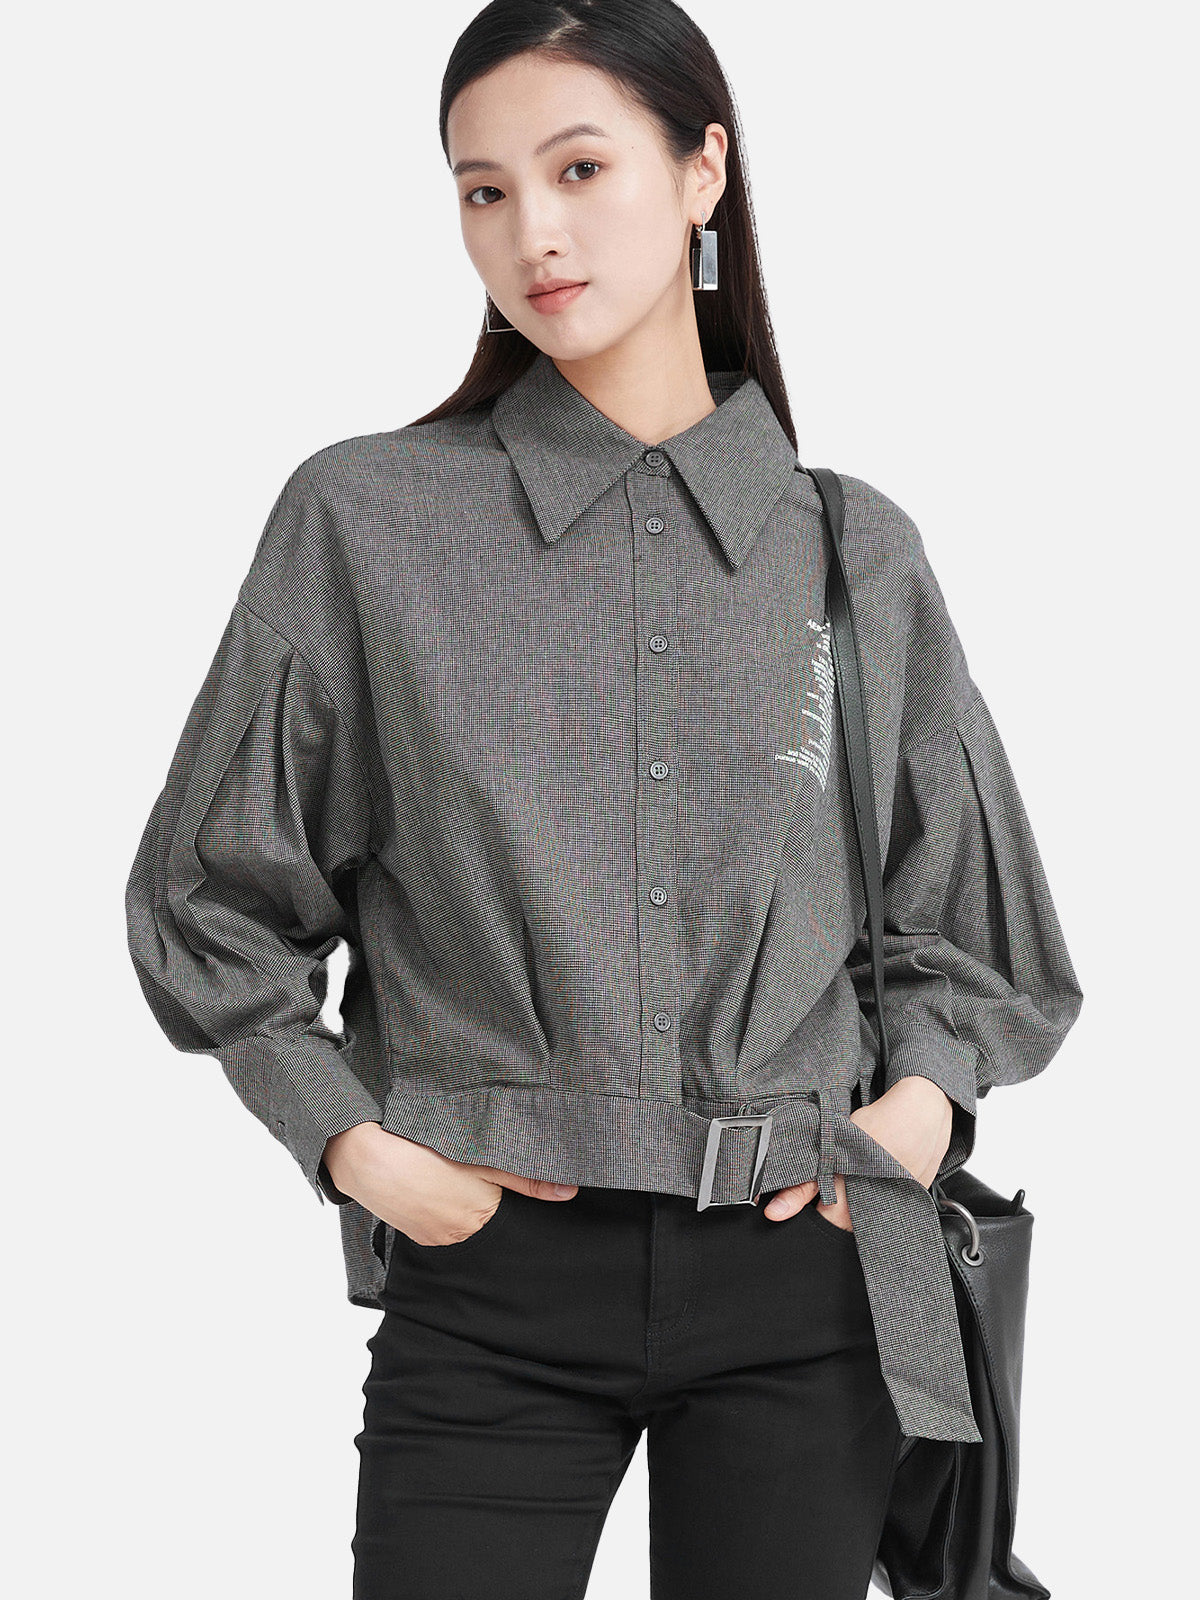 The waist-cinched design of the long-sleeve letter striped shirt showcasing the graceful curves of women